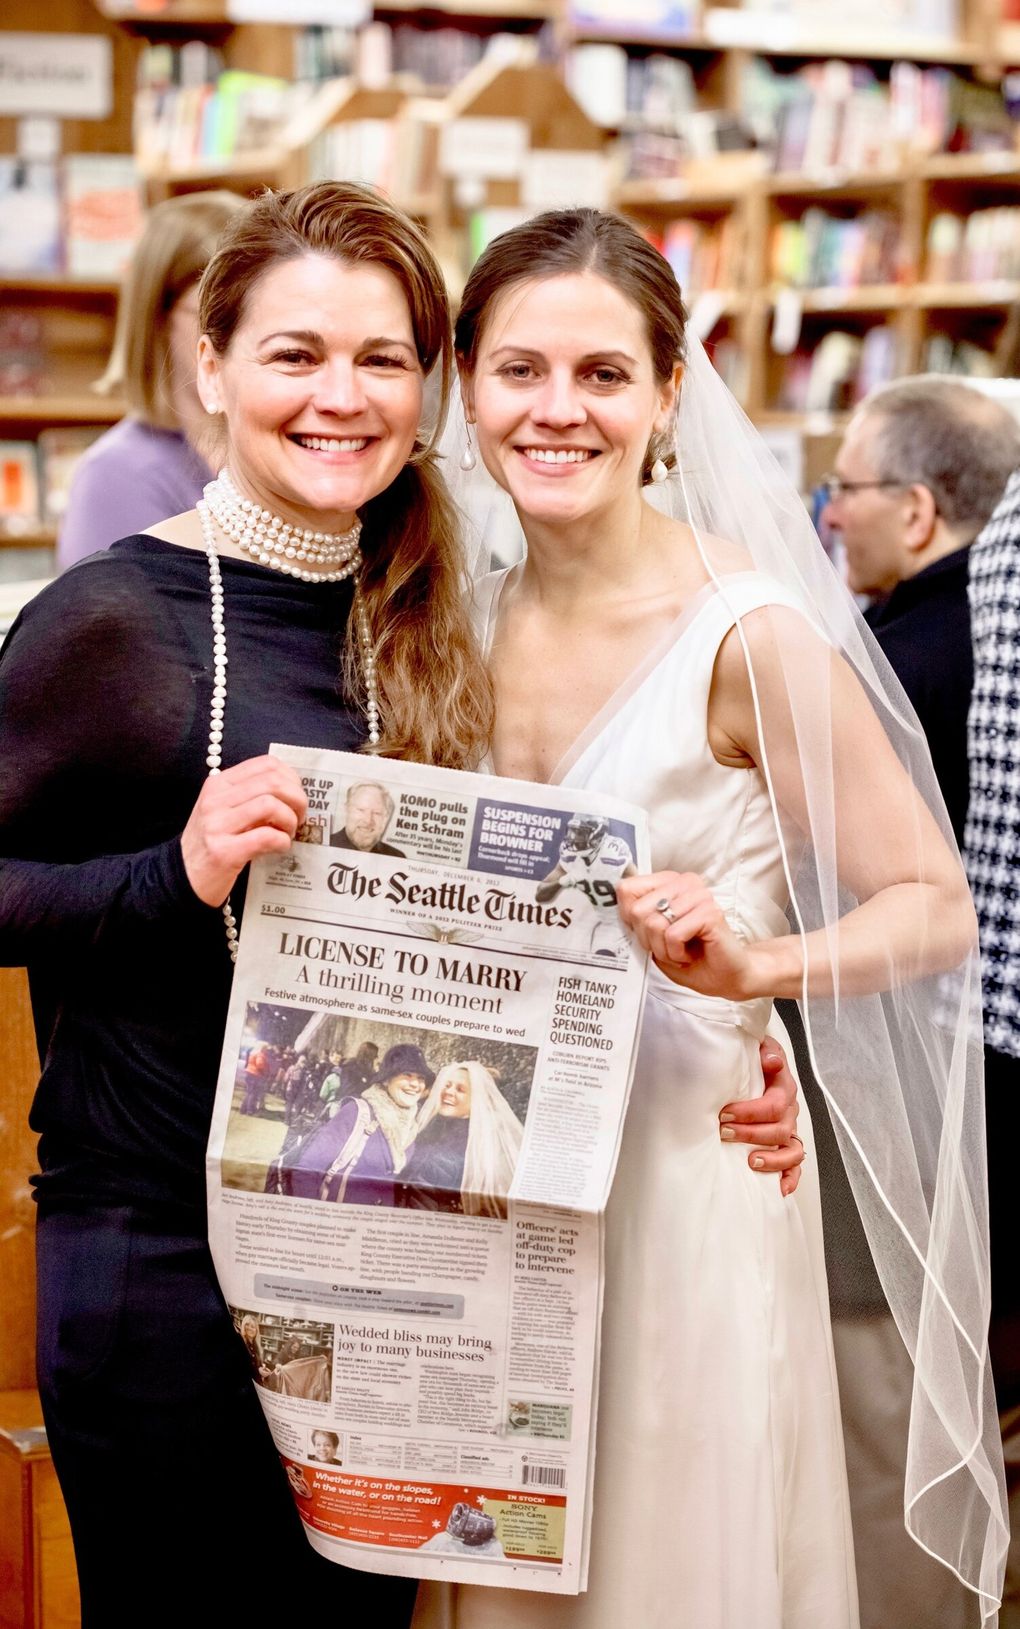 Celebrating marriage equality: Couples sent us their wedding photos